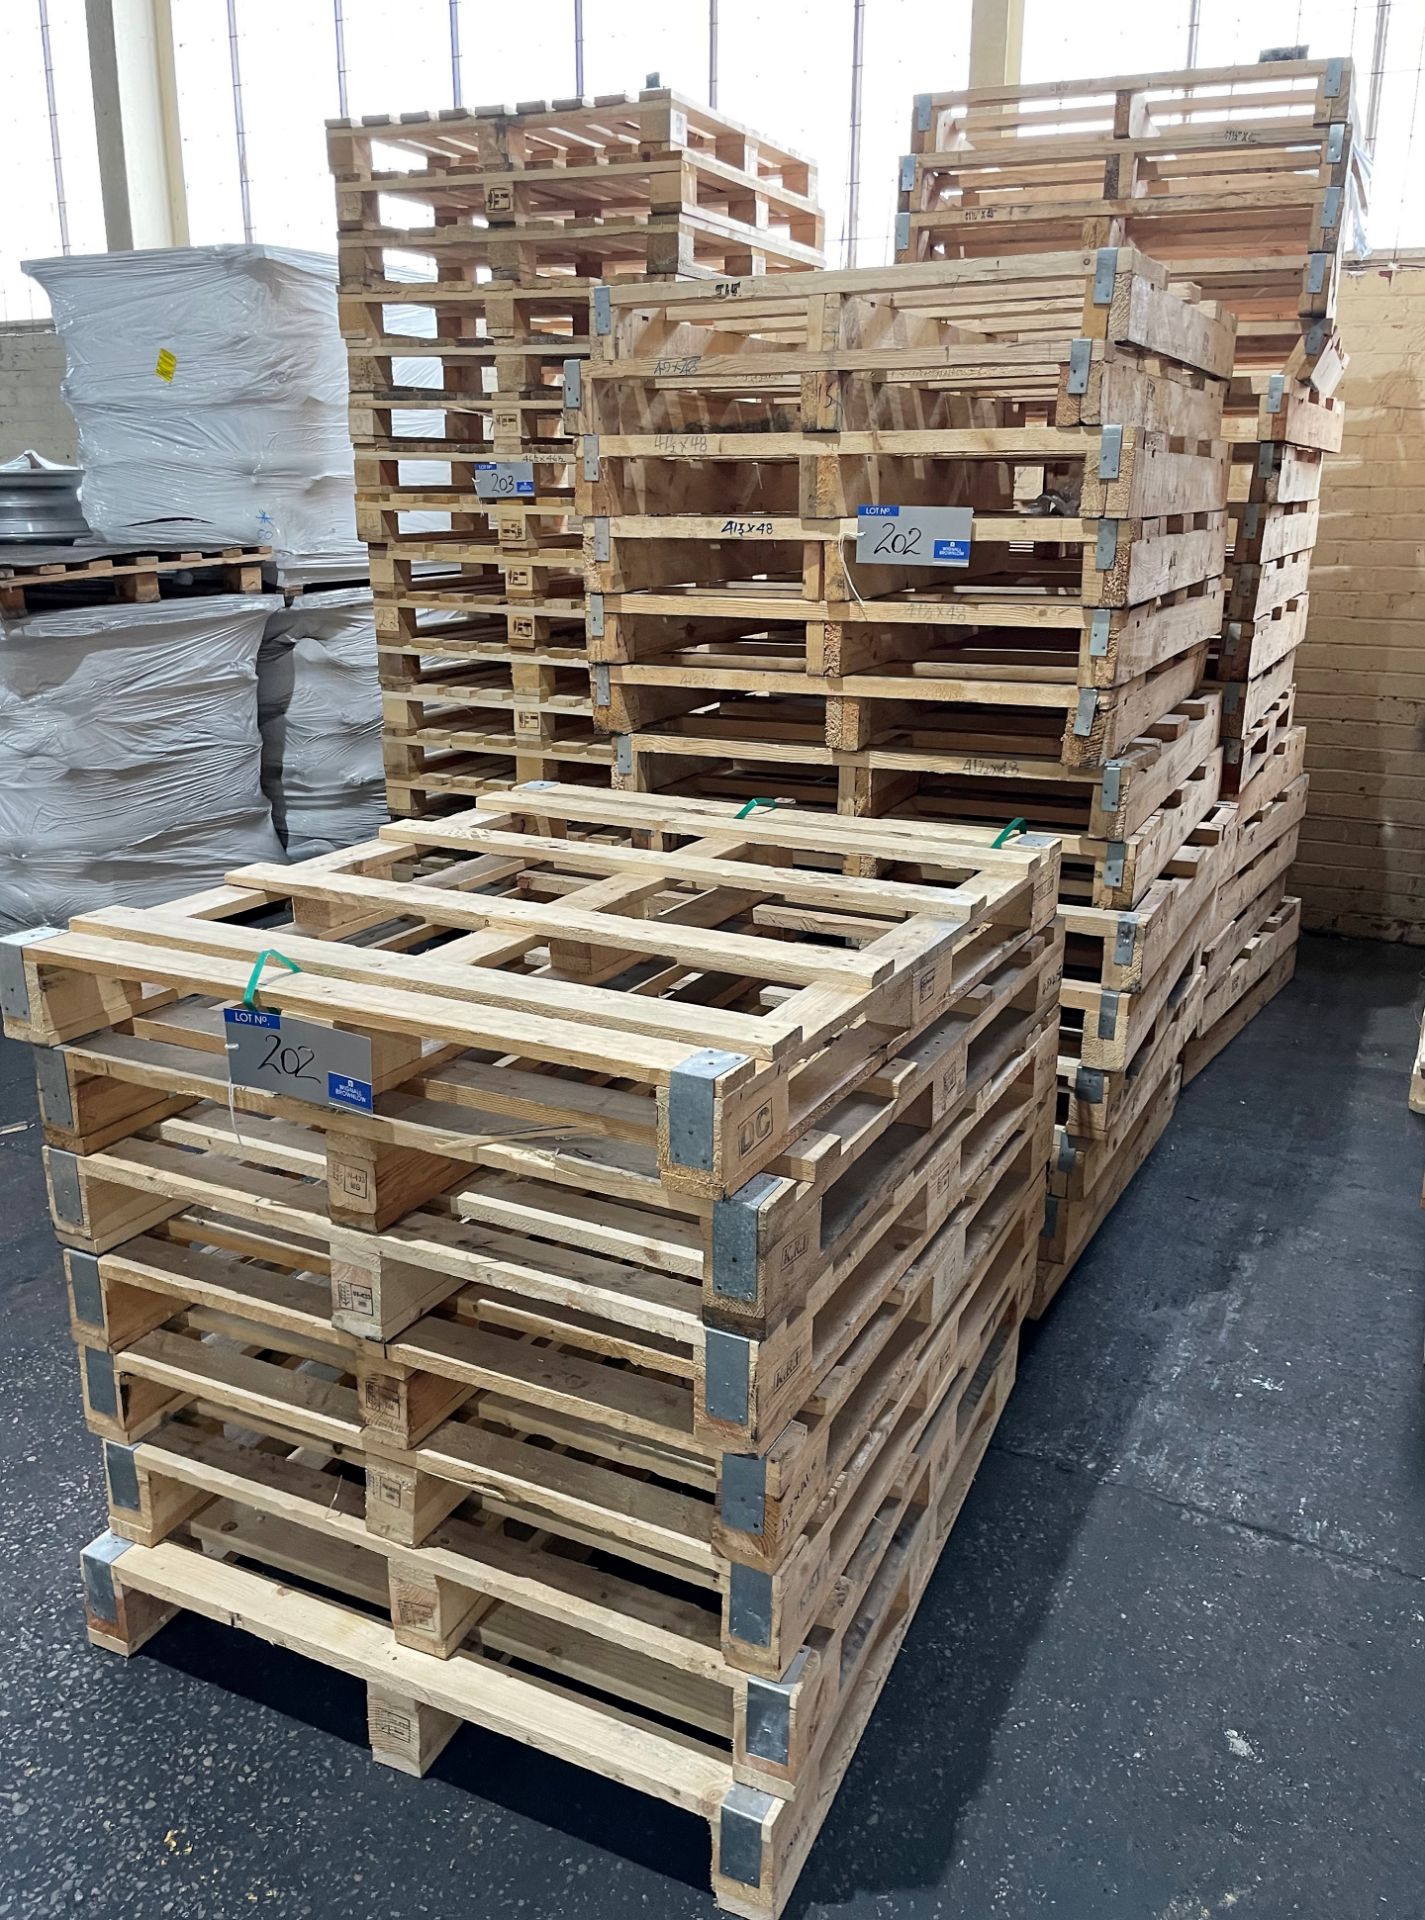 39 Timber 2 way Pallets, 41.5in x 48in.